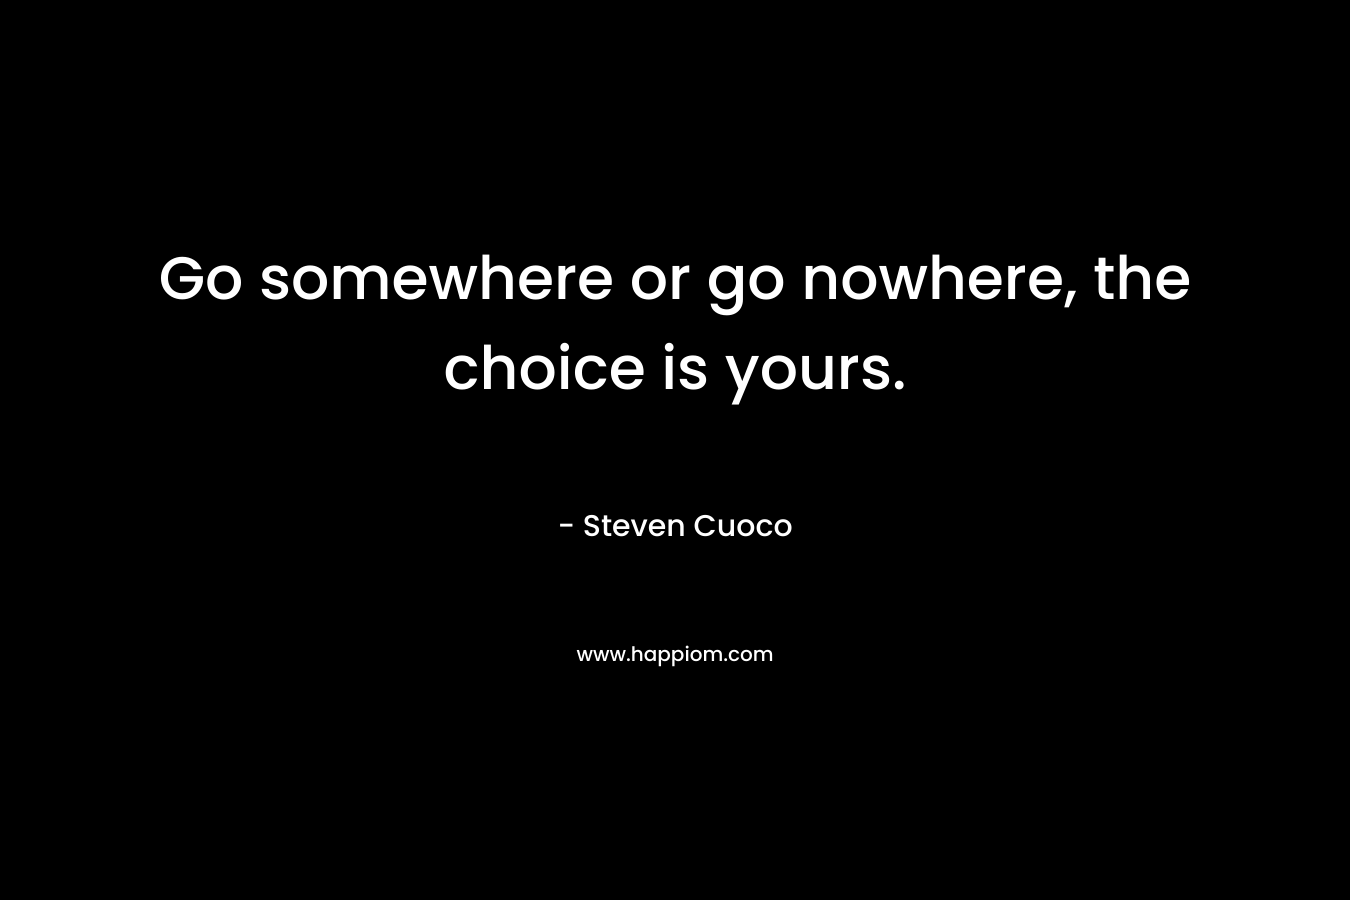 Go somewhere or go nowhere, the choice is yours.